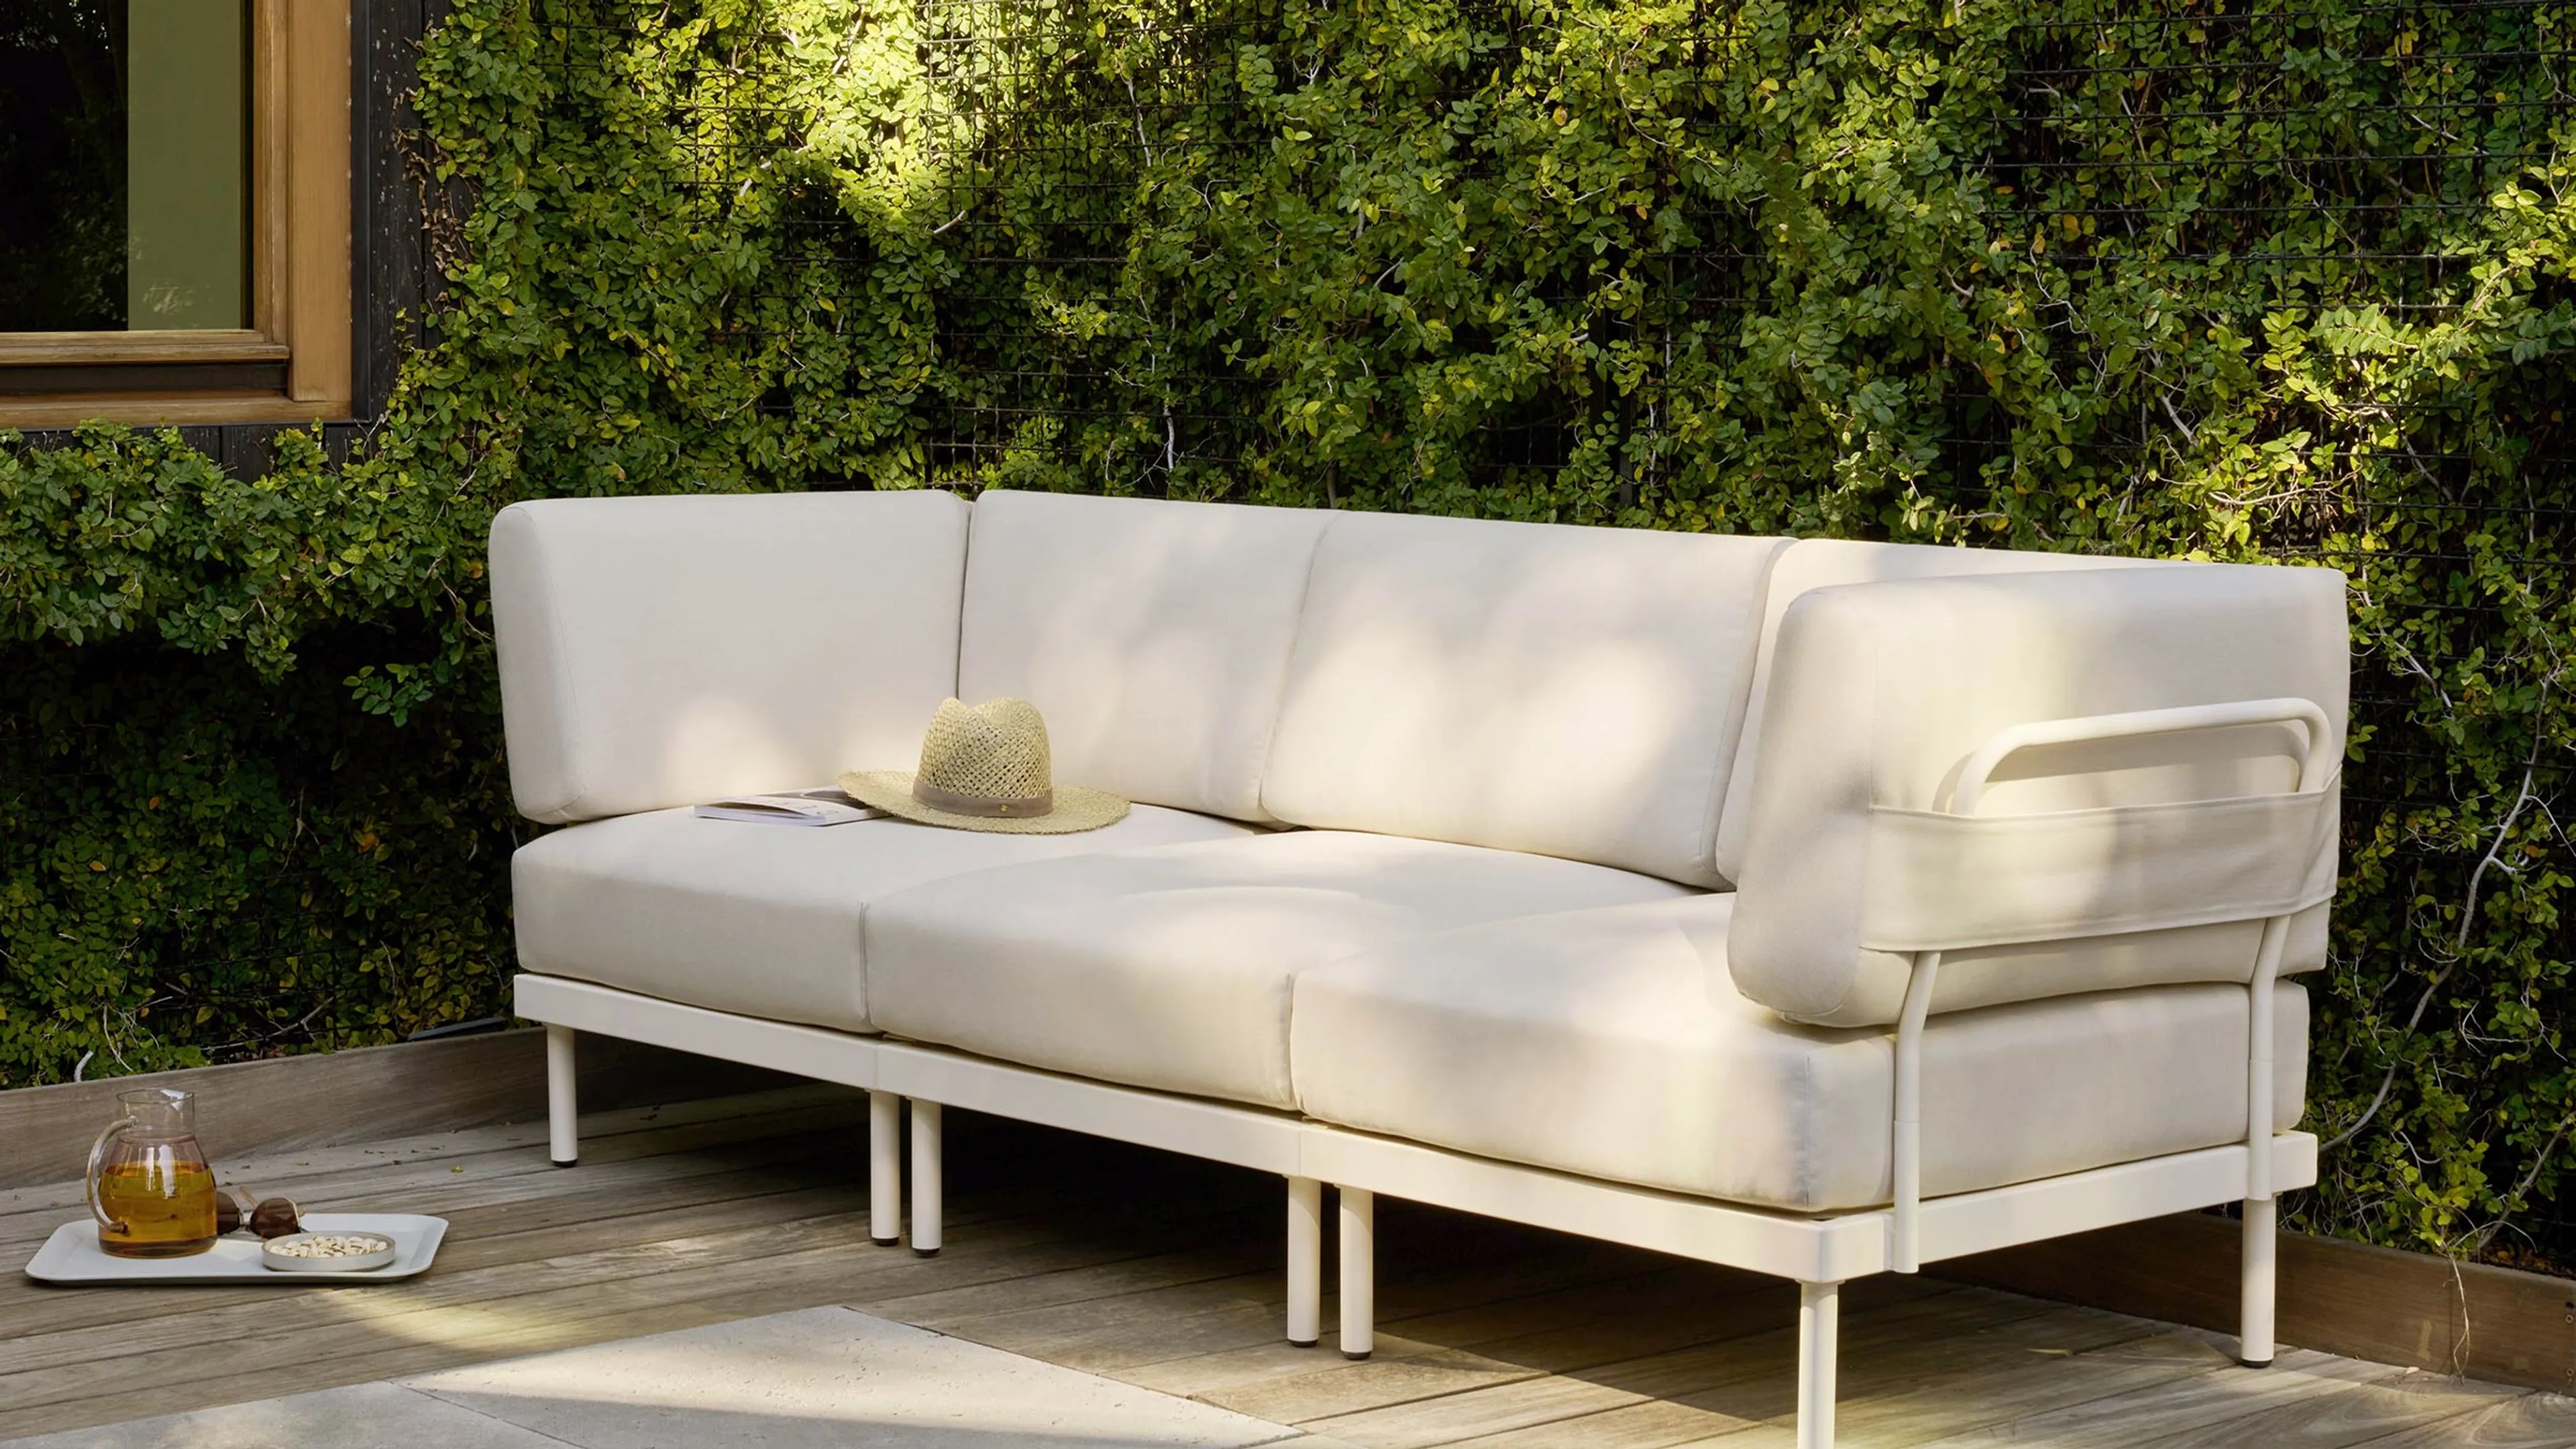 Two Relay Outdoor 3-Piece Armless Sofas & Coffee Table Set